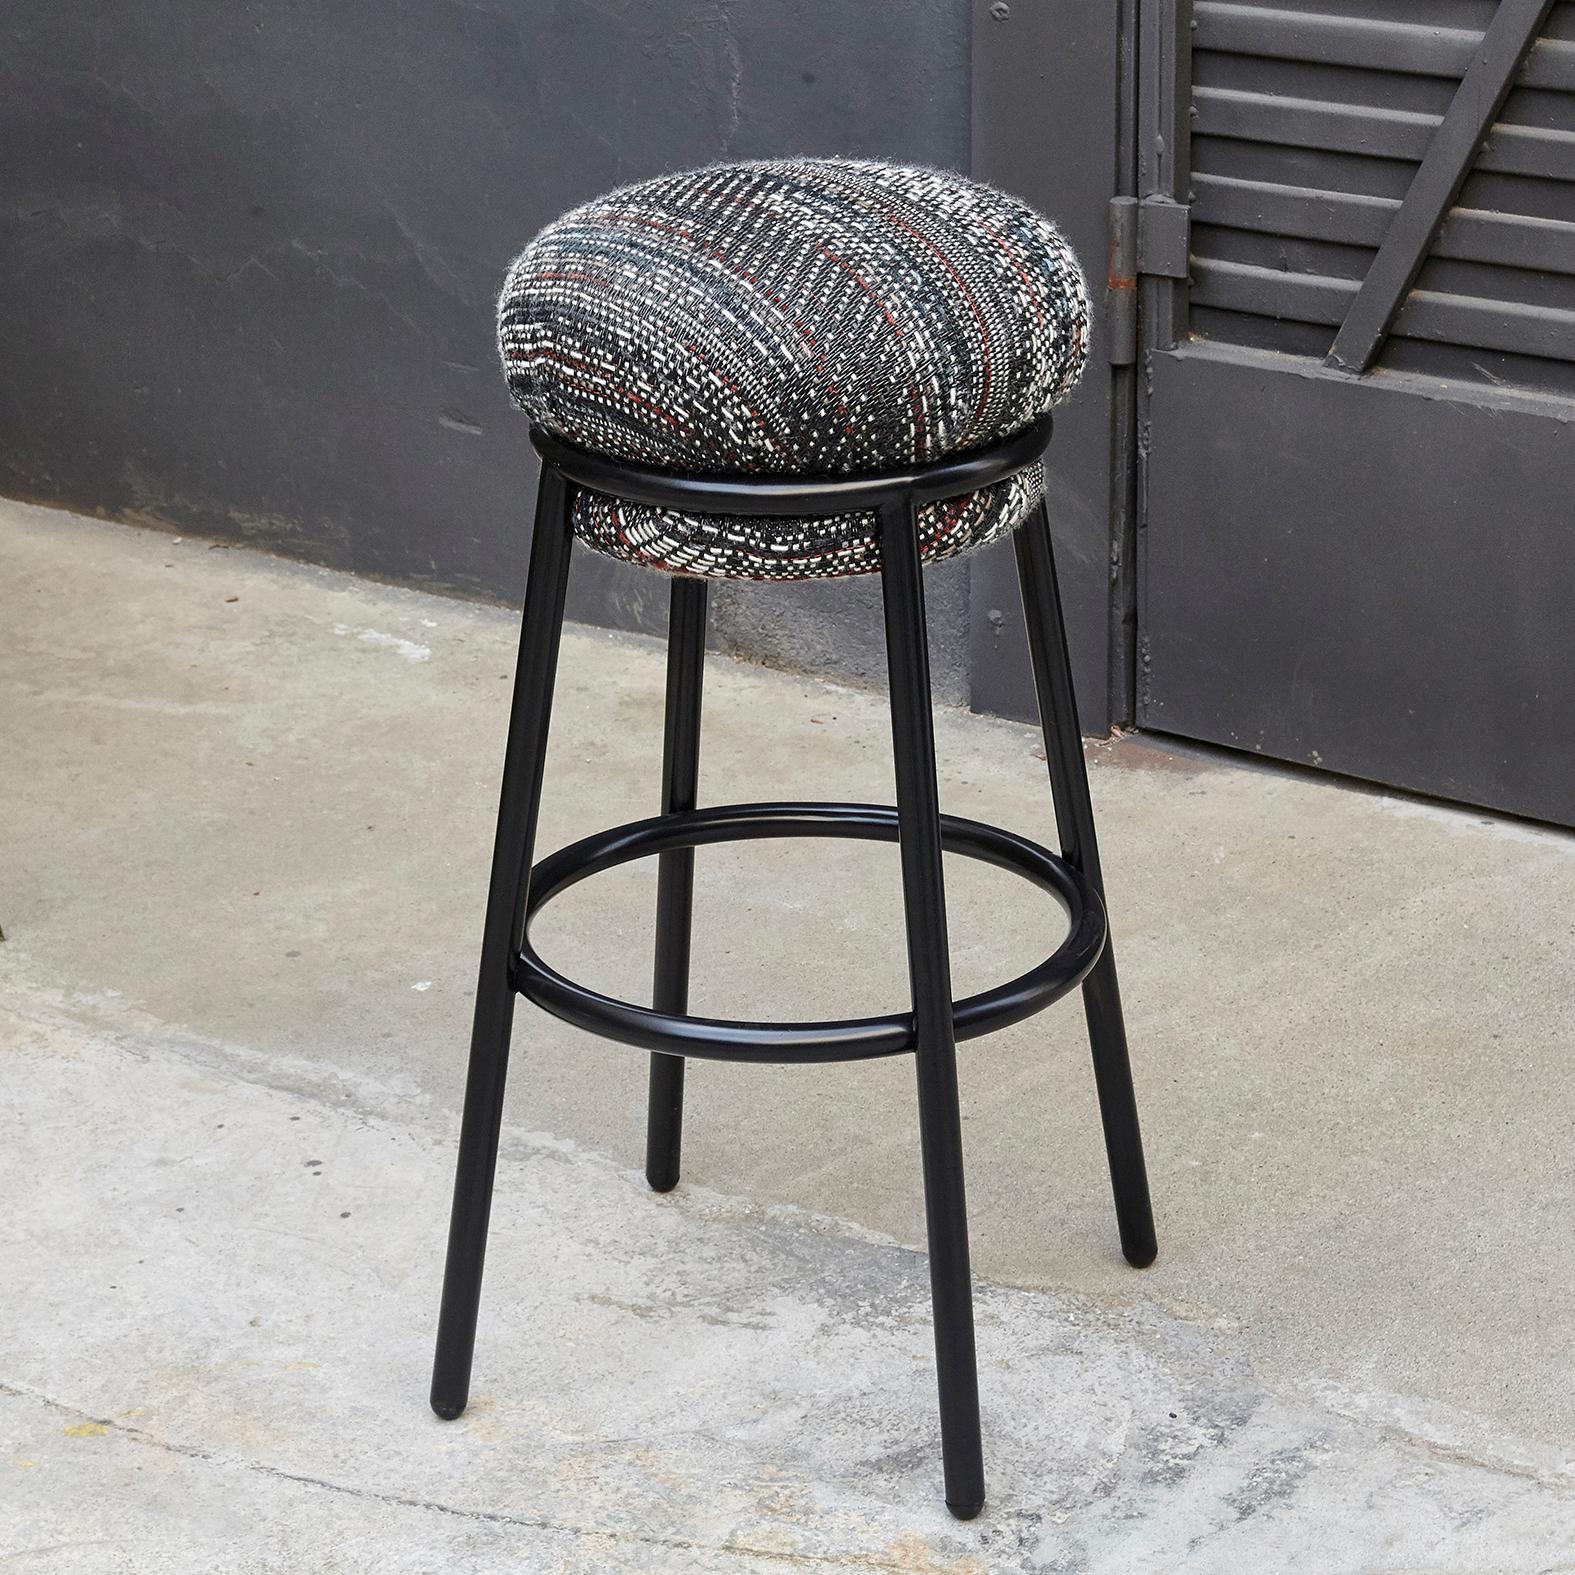 Bar stool designed by Stephen Burks manufactured by BD Design Barcelona
An iron tubular (25mm) structured armchair. Seat and backrest upholstered in fabric.

The fabric upholstery oozes over the bare iron structure. 

Measure: Ø36 x H 80